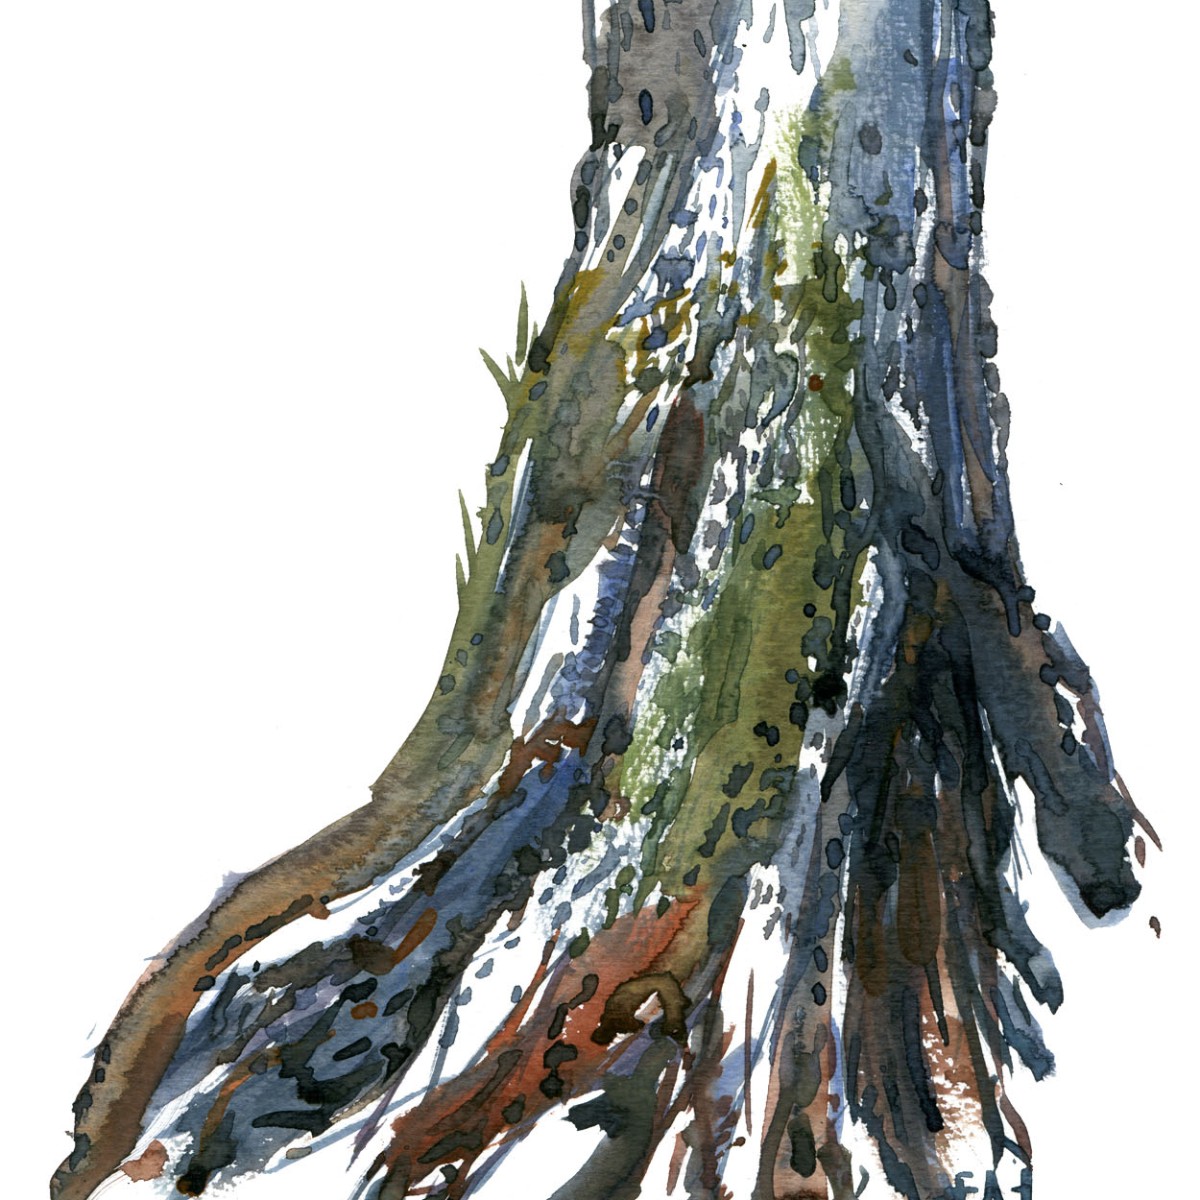 Watercolor of tree lower part. Art by Frits Ahlefeldt